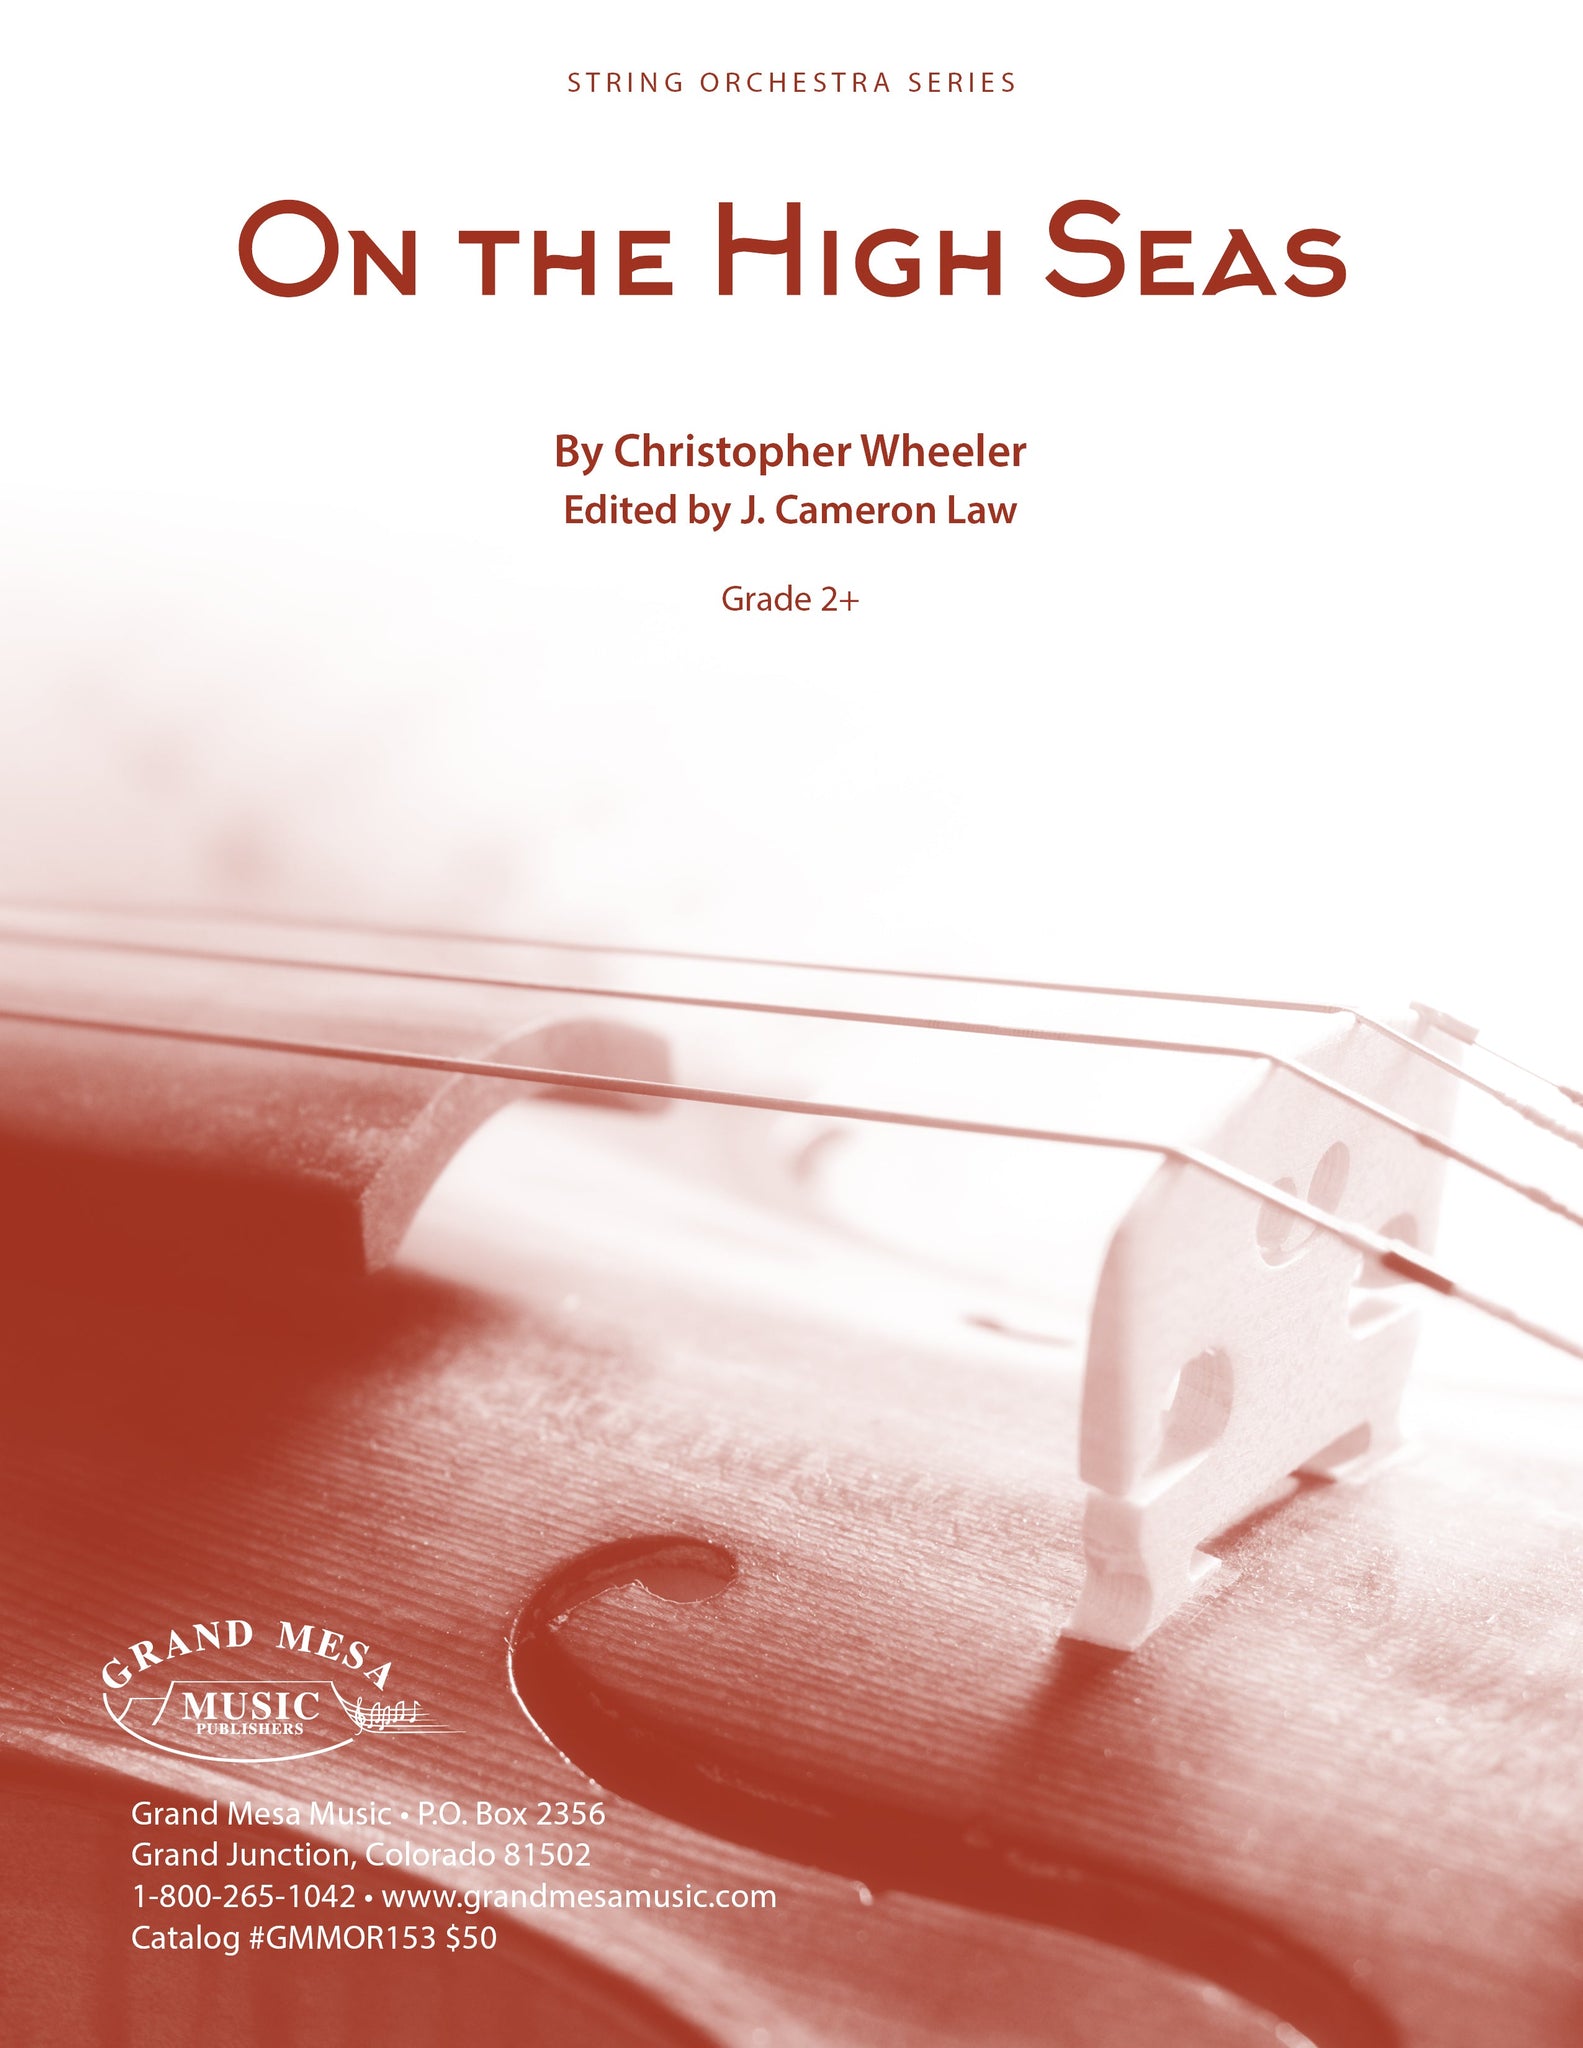 Strings sheet music cover of On the High Seas, composed by Christopher Wheeler.